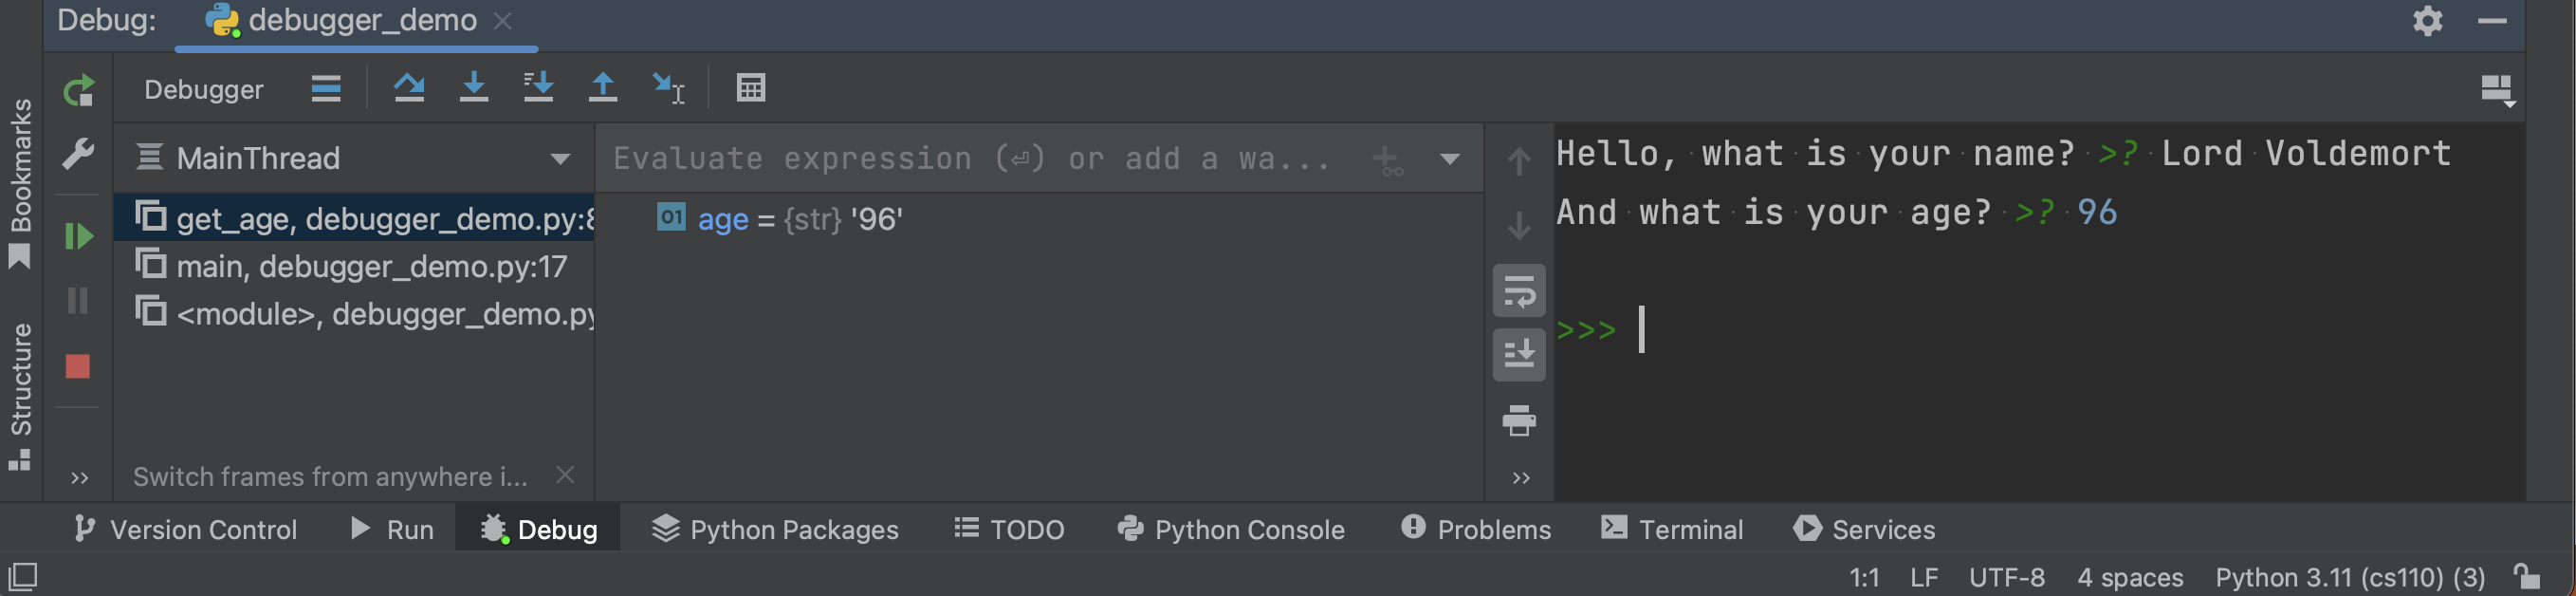 Pycharm age variable has what you typed